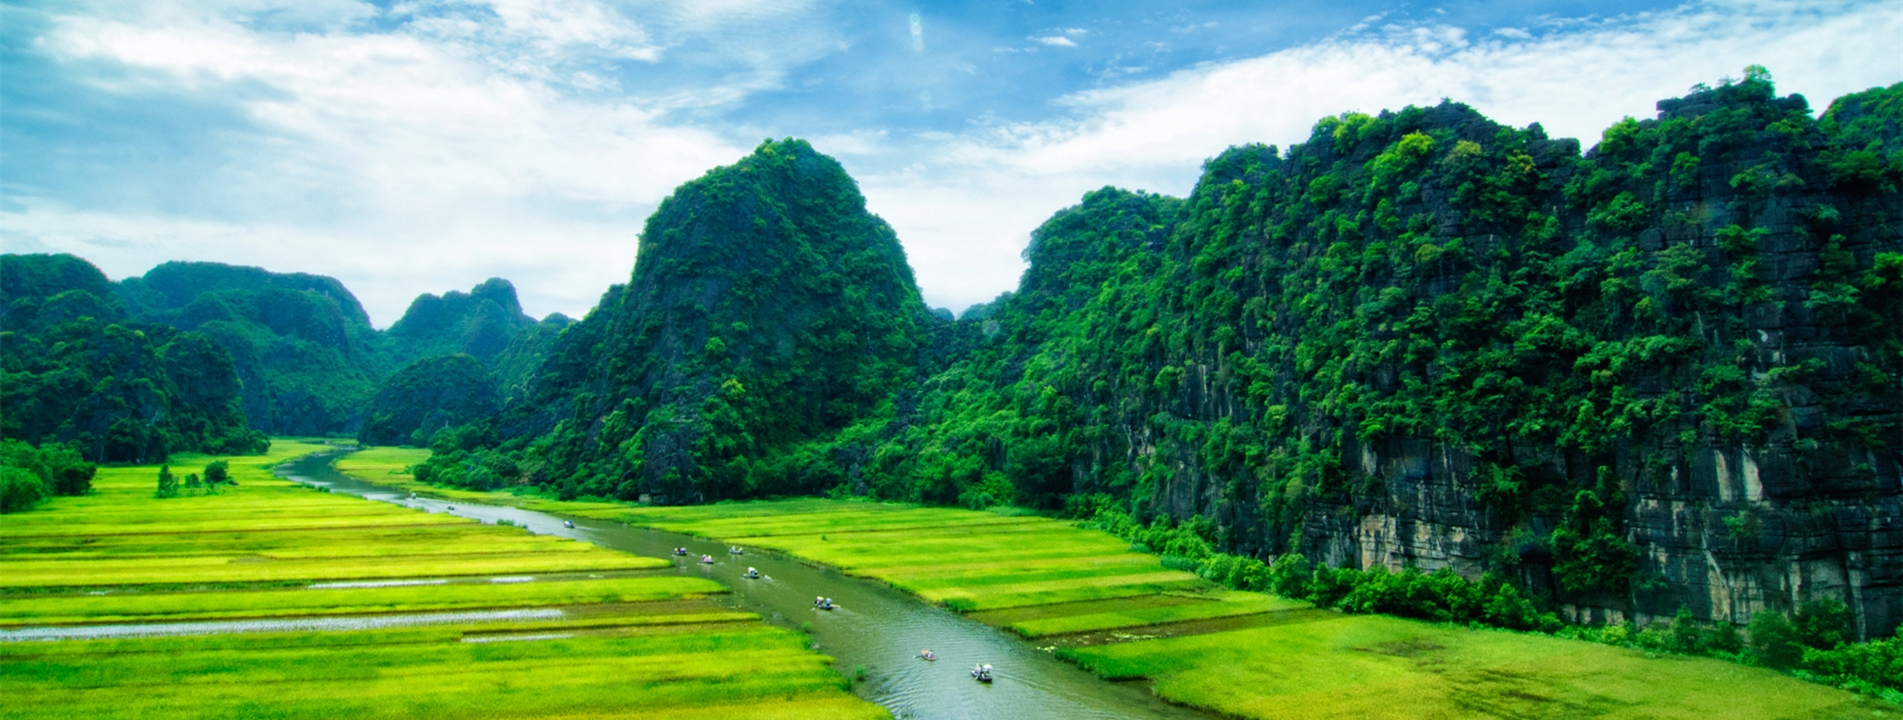 6-Day Northern Vietnam Discovery Tour